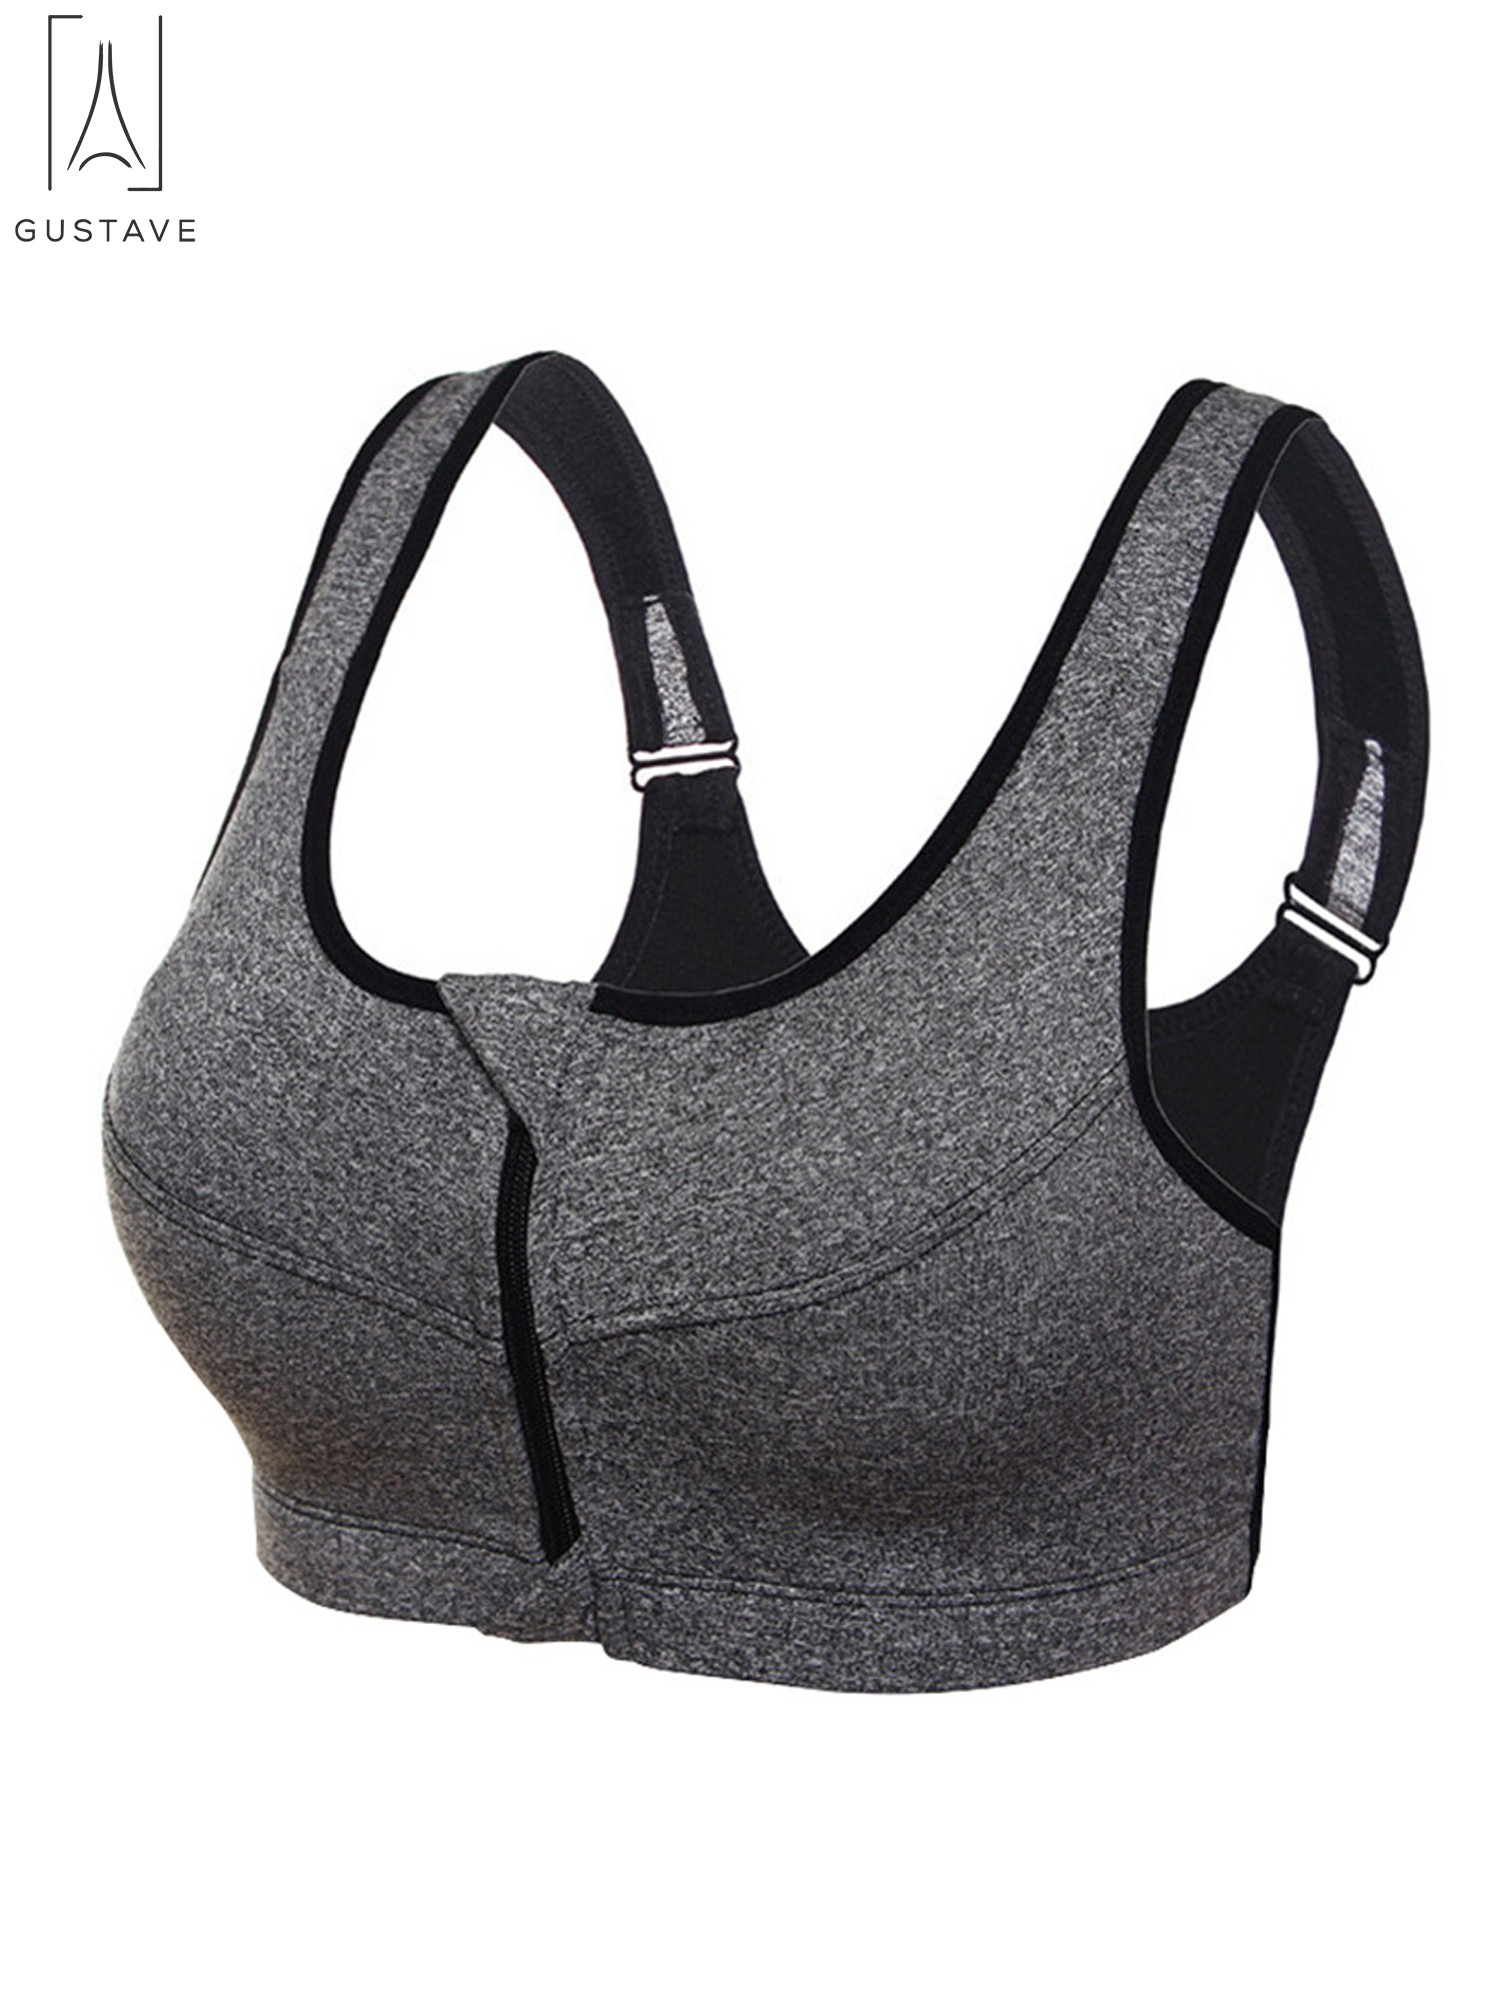 Gustave Women High Impact Front Zip Sports Bra Push Up Padded Workout Yoga Bras Wirefree Shockproof Fitness Vest Tops "Gray,L" - image 5 of 10